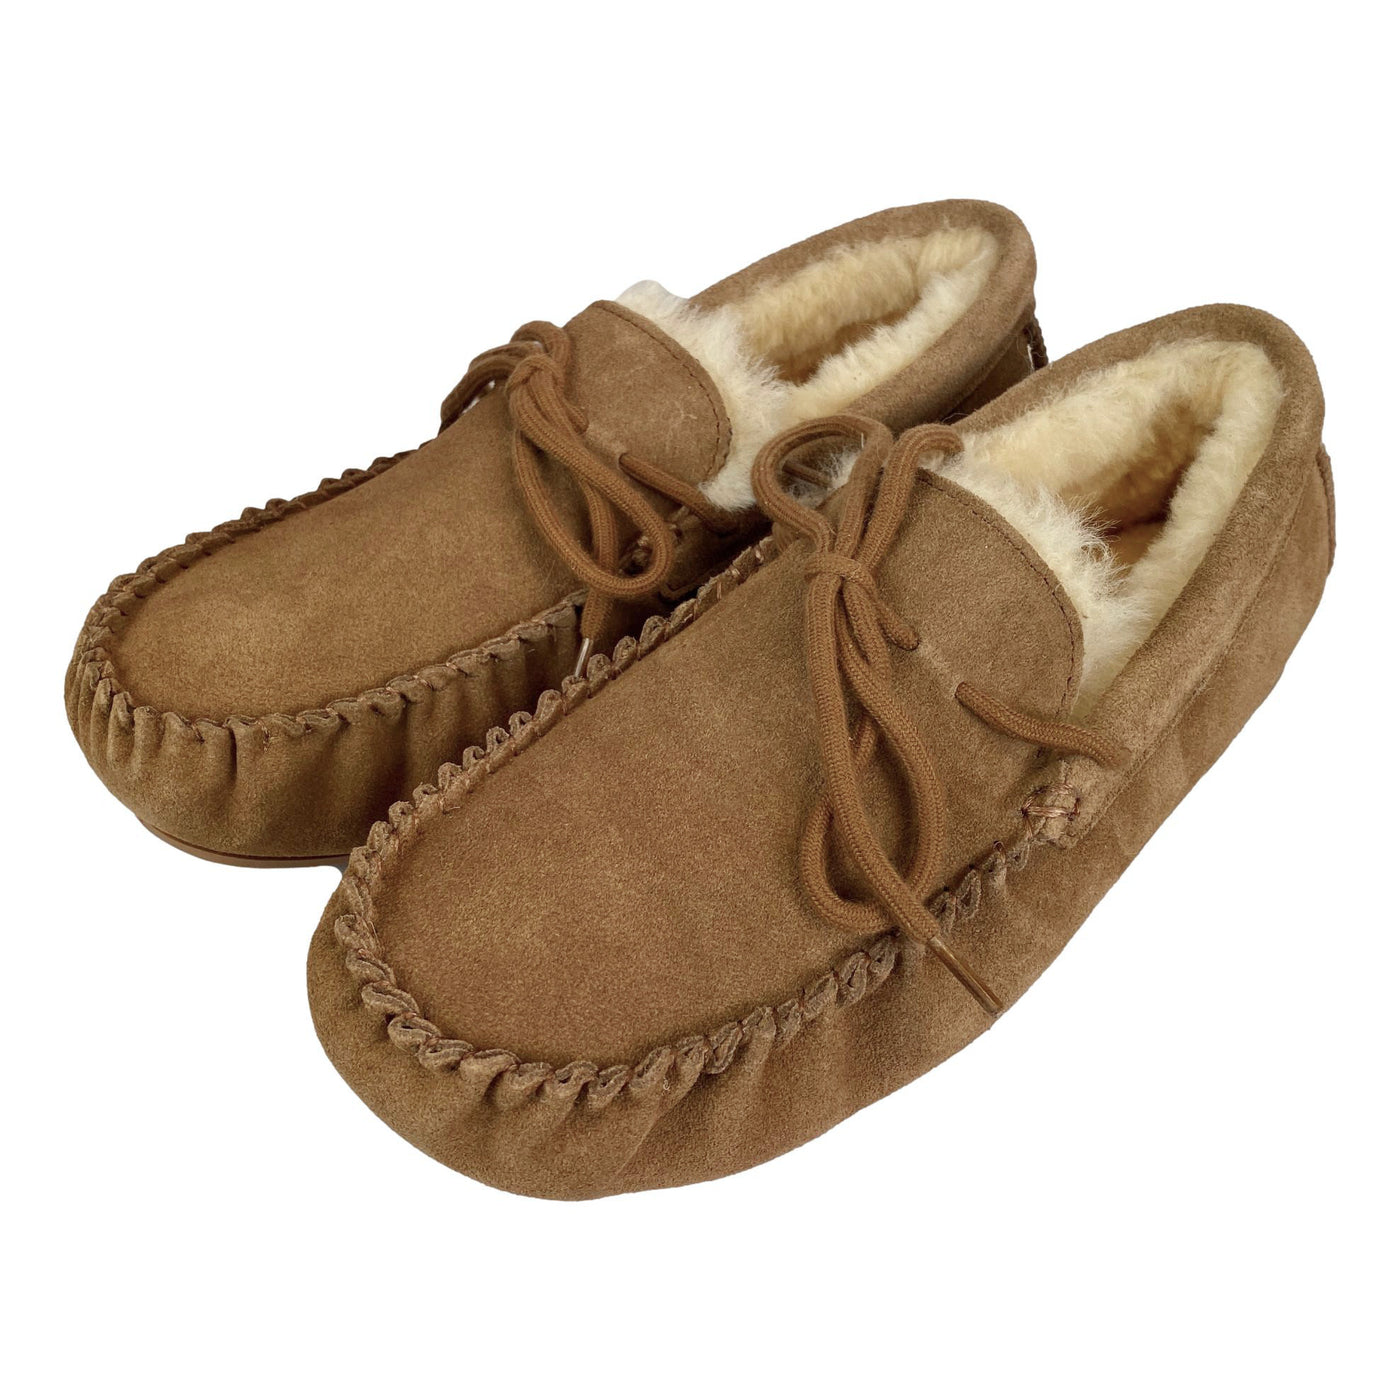 Deluxe Mens 'Adam' Sheepskin Moccasin Slippers with Hard Sole - Chestnut